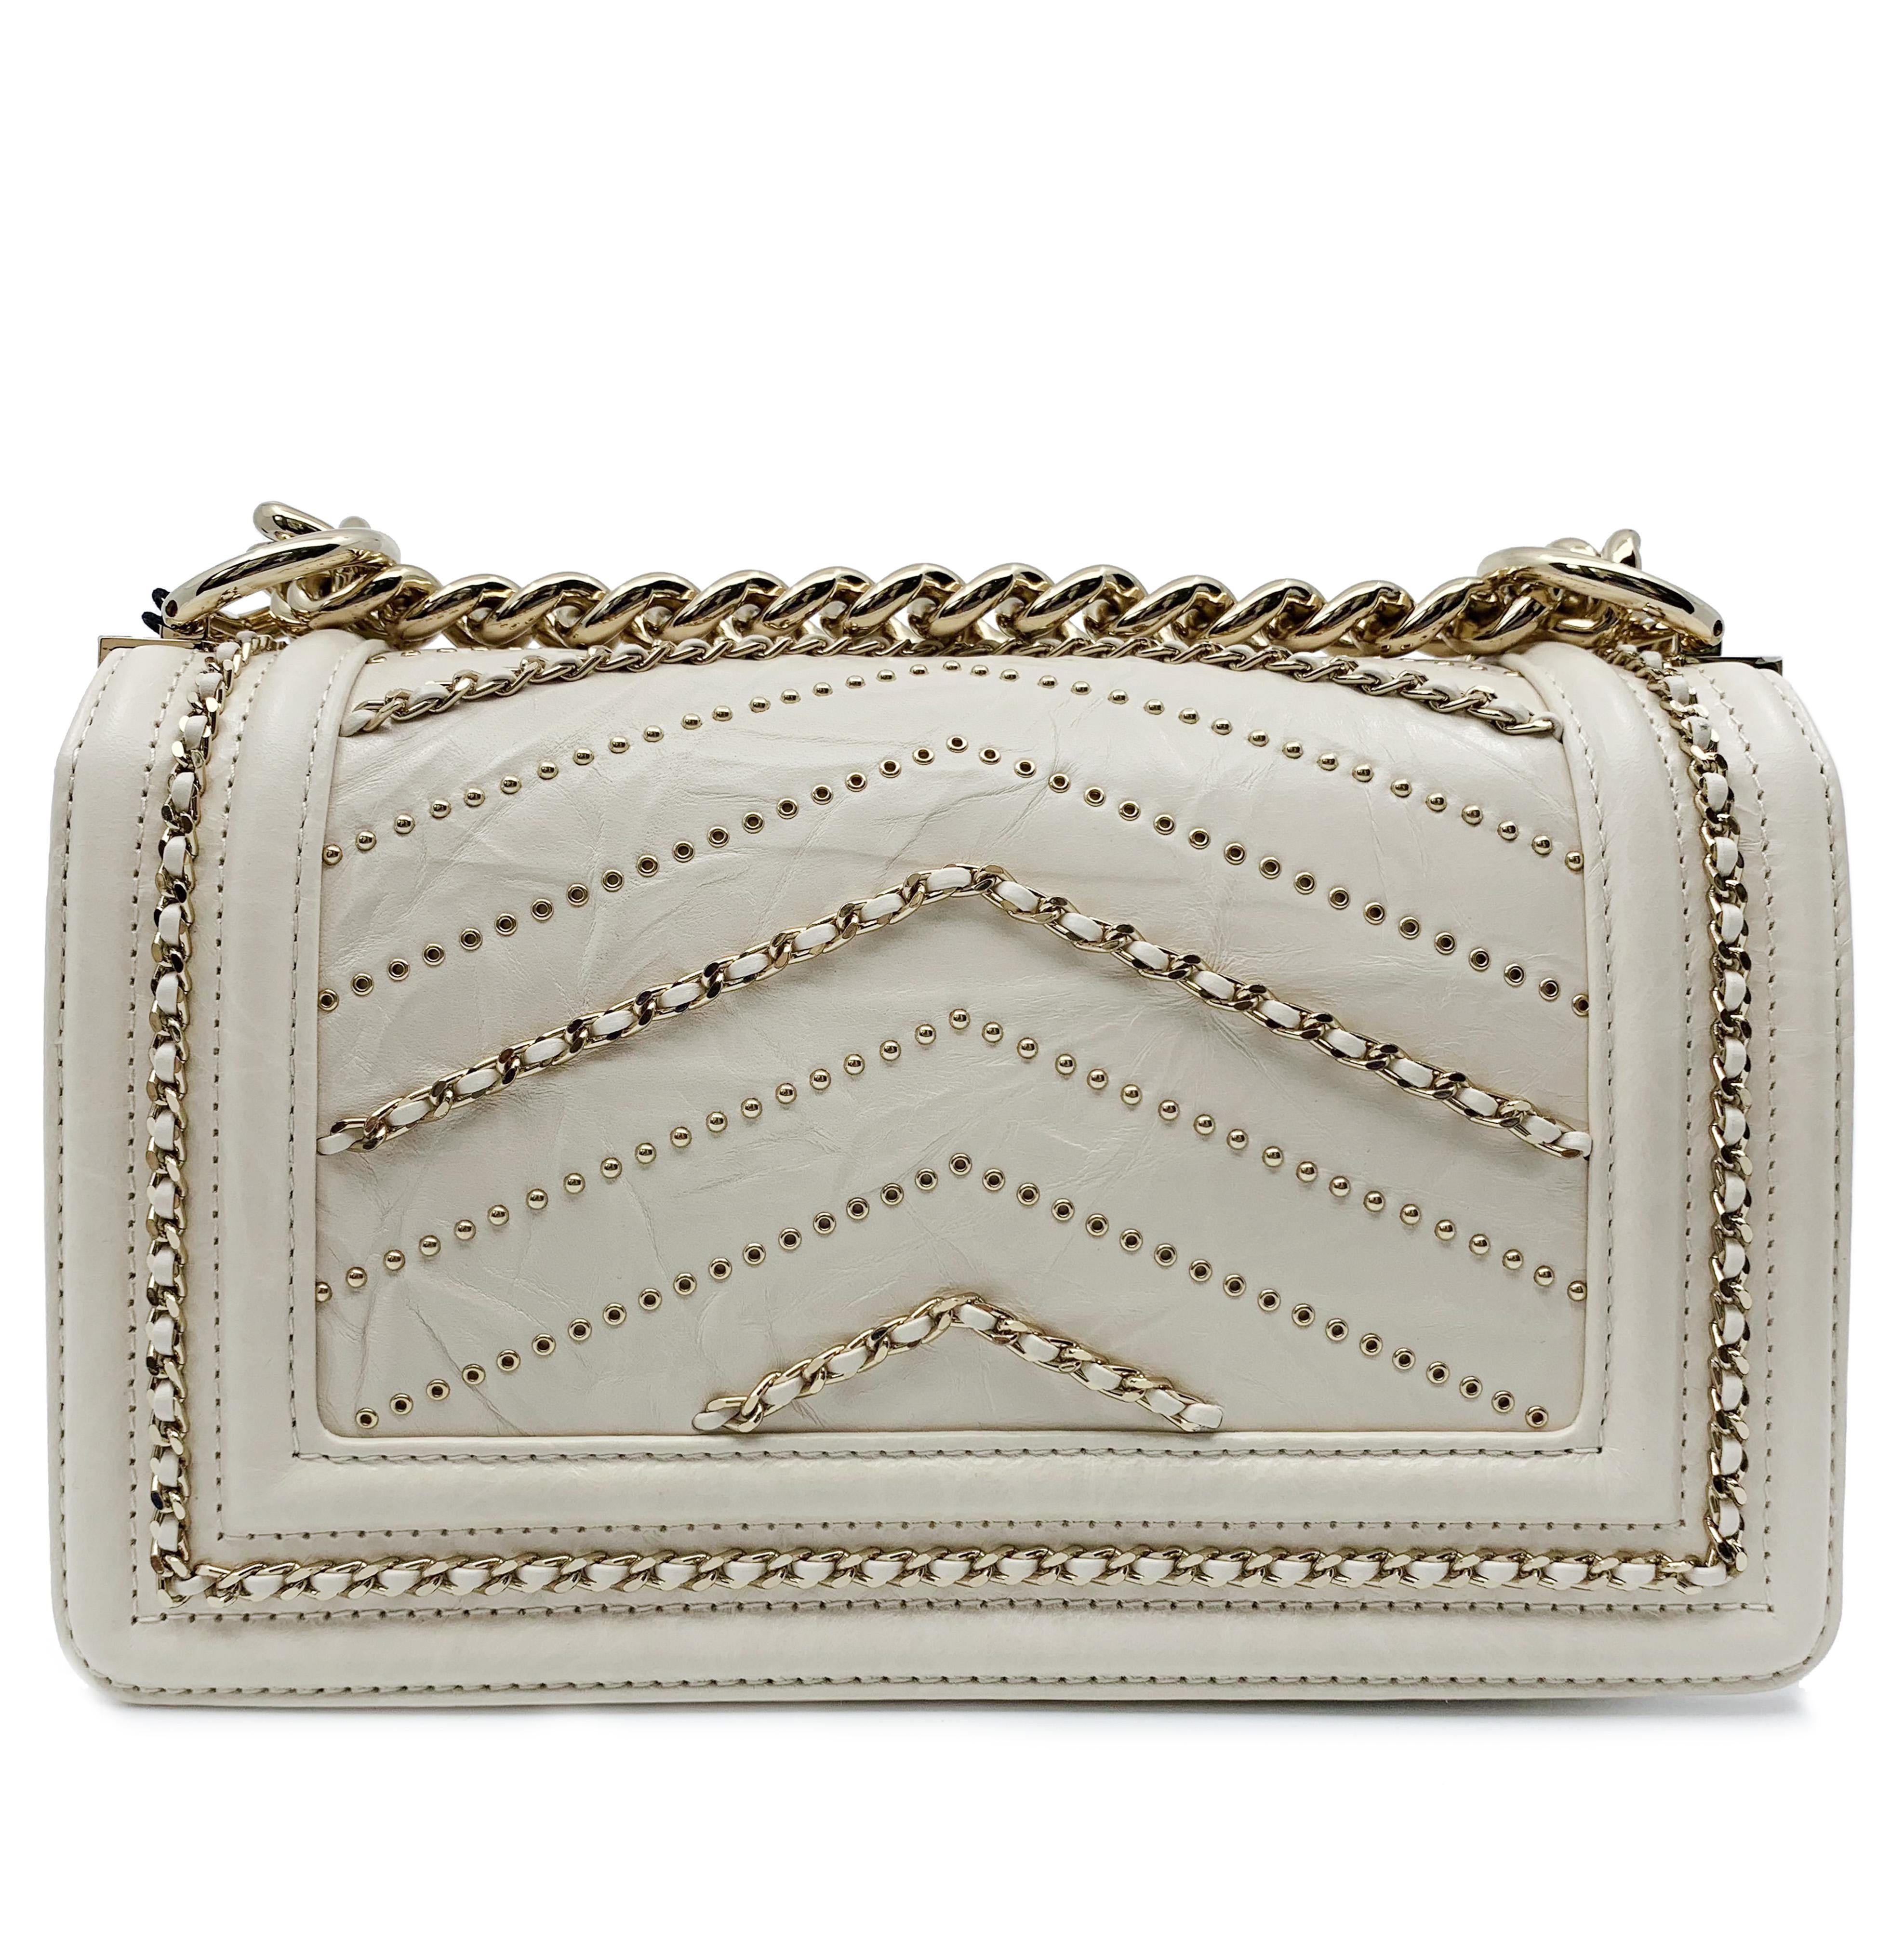 Women's Chanel Crumpled Calfskin Small Boy Bag Ivory 2018 Collection A67085 Y83967 10800